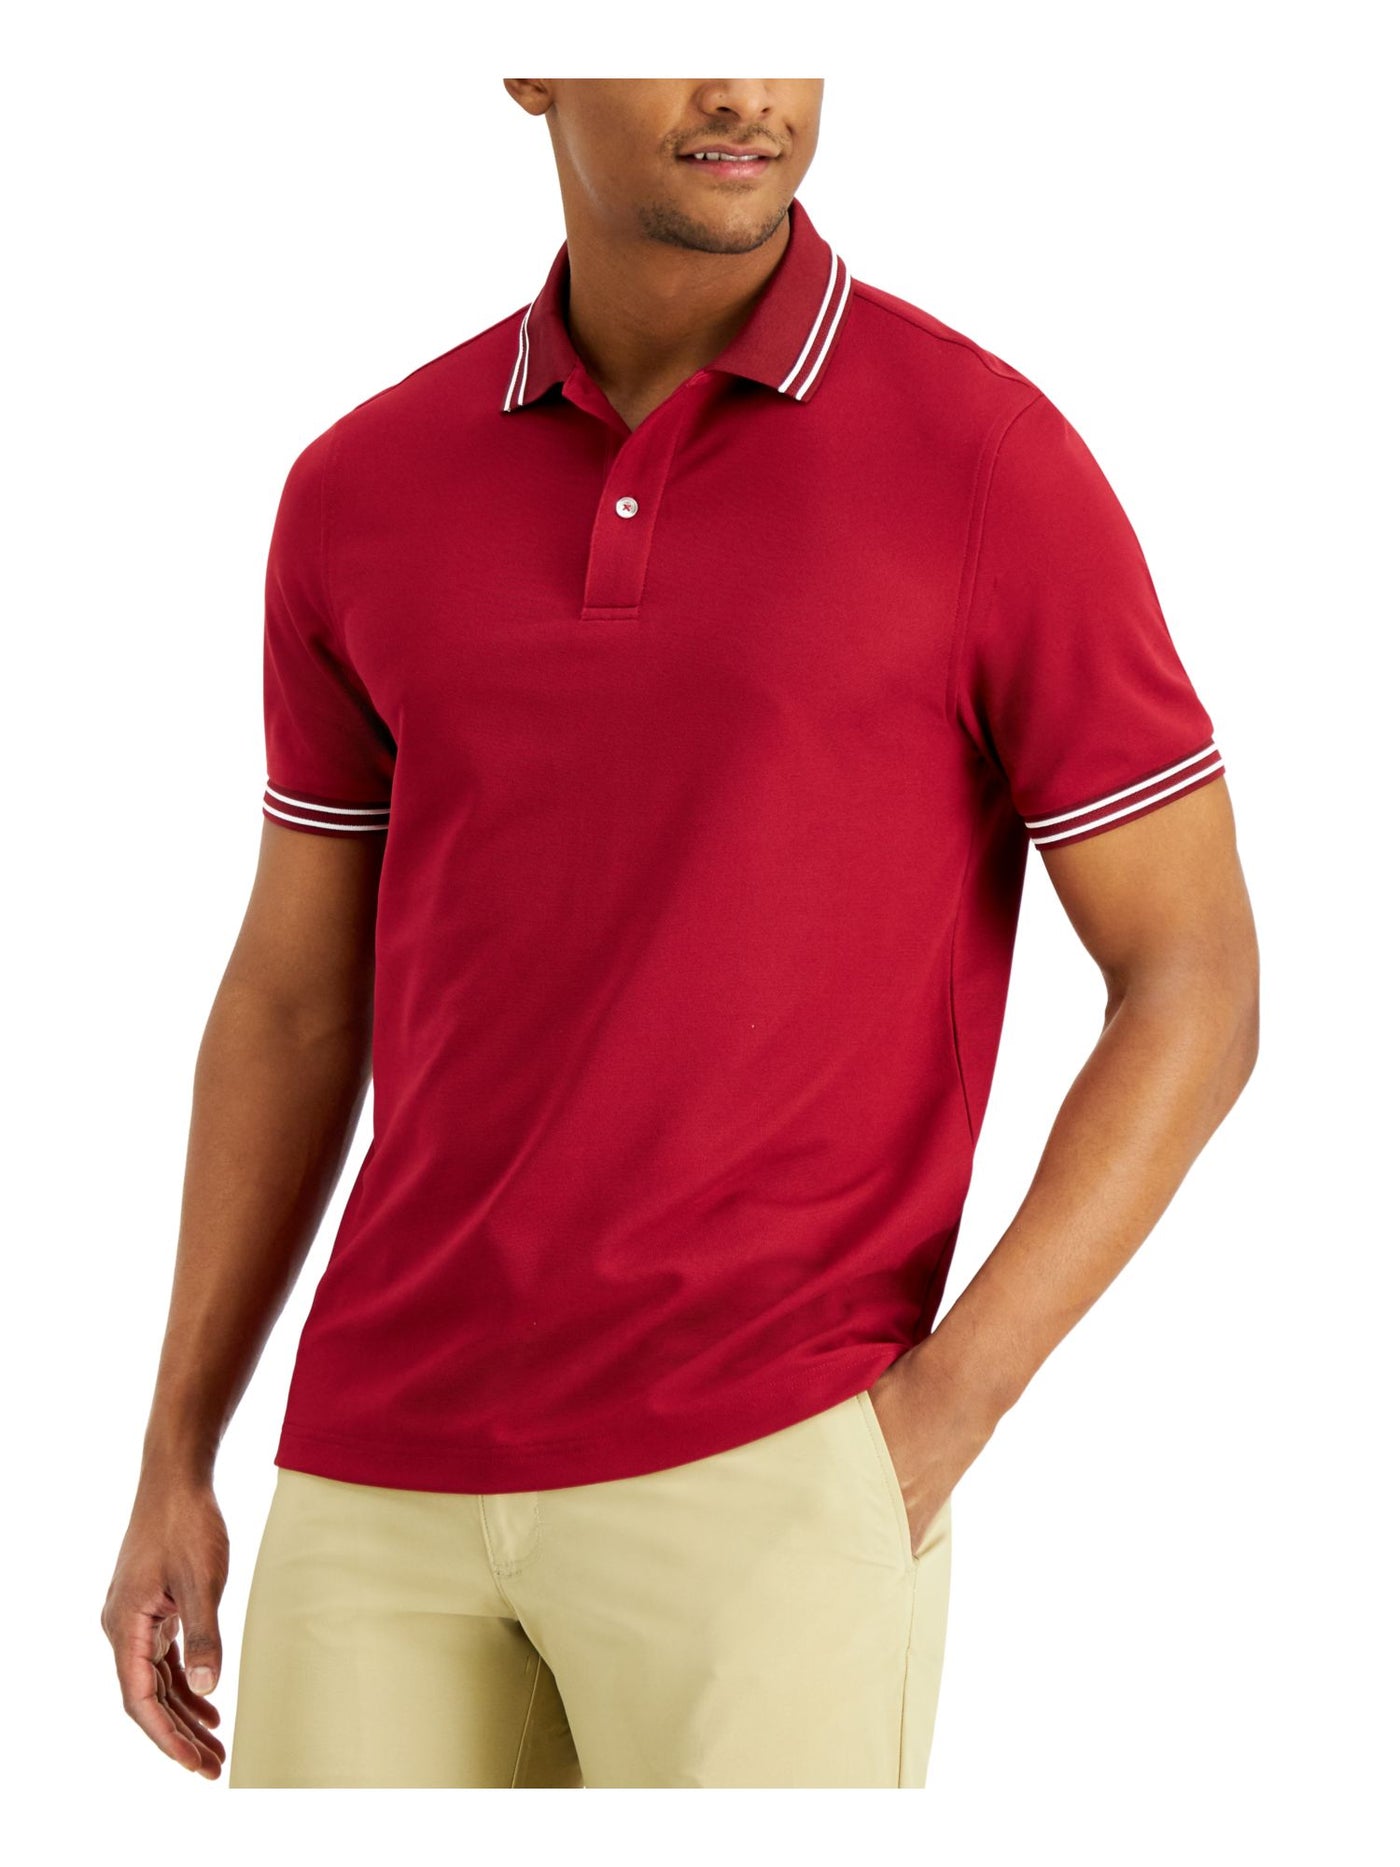 CLUBROOM Mens Red Short Sleeve Classic Fit Moisture Wicking Polo S